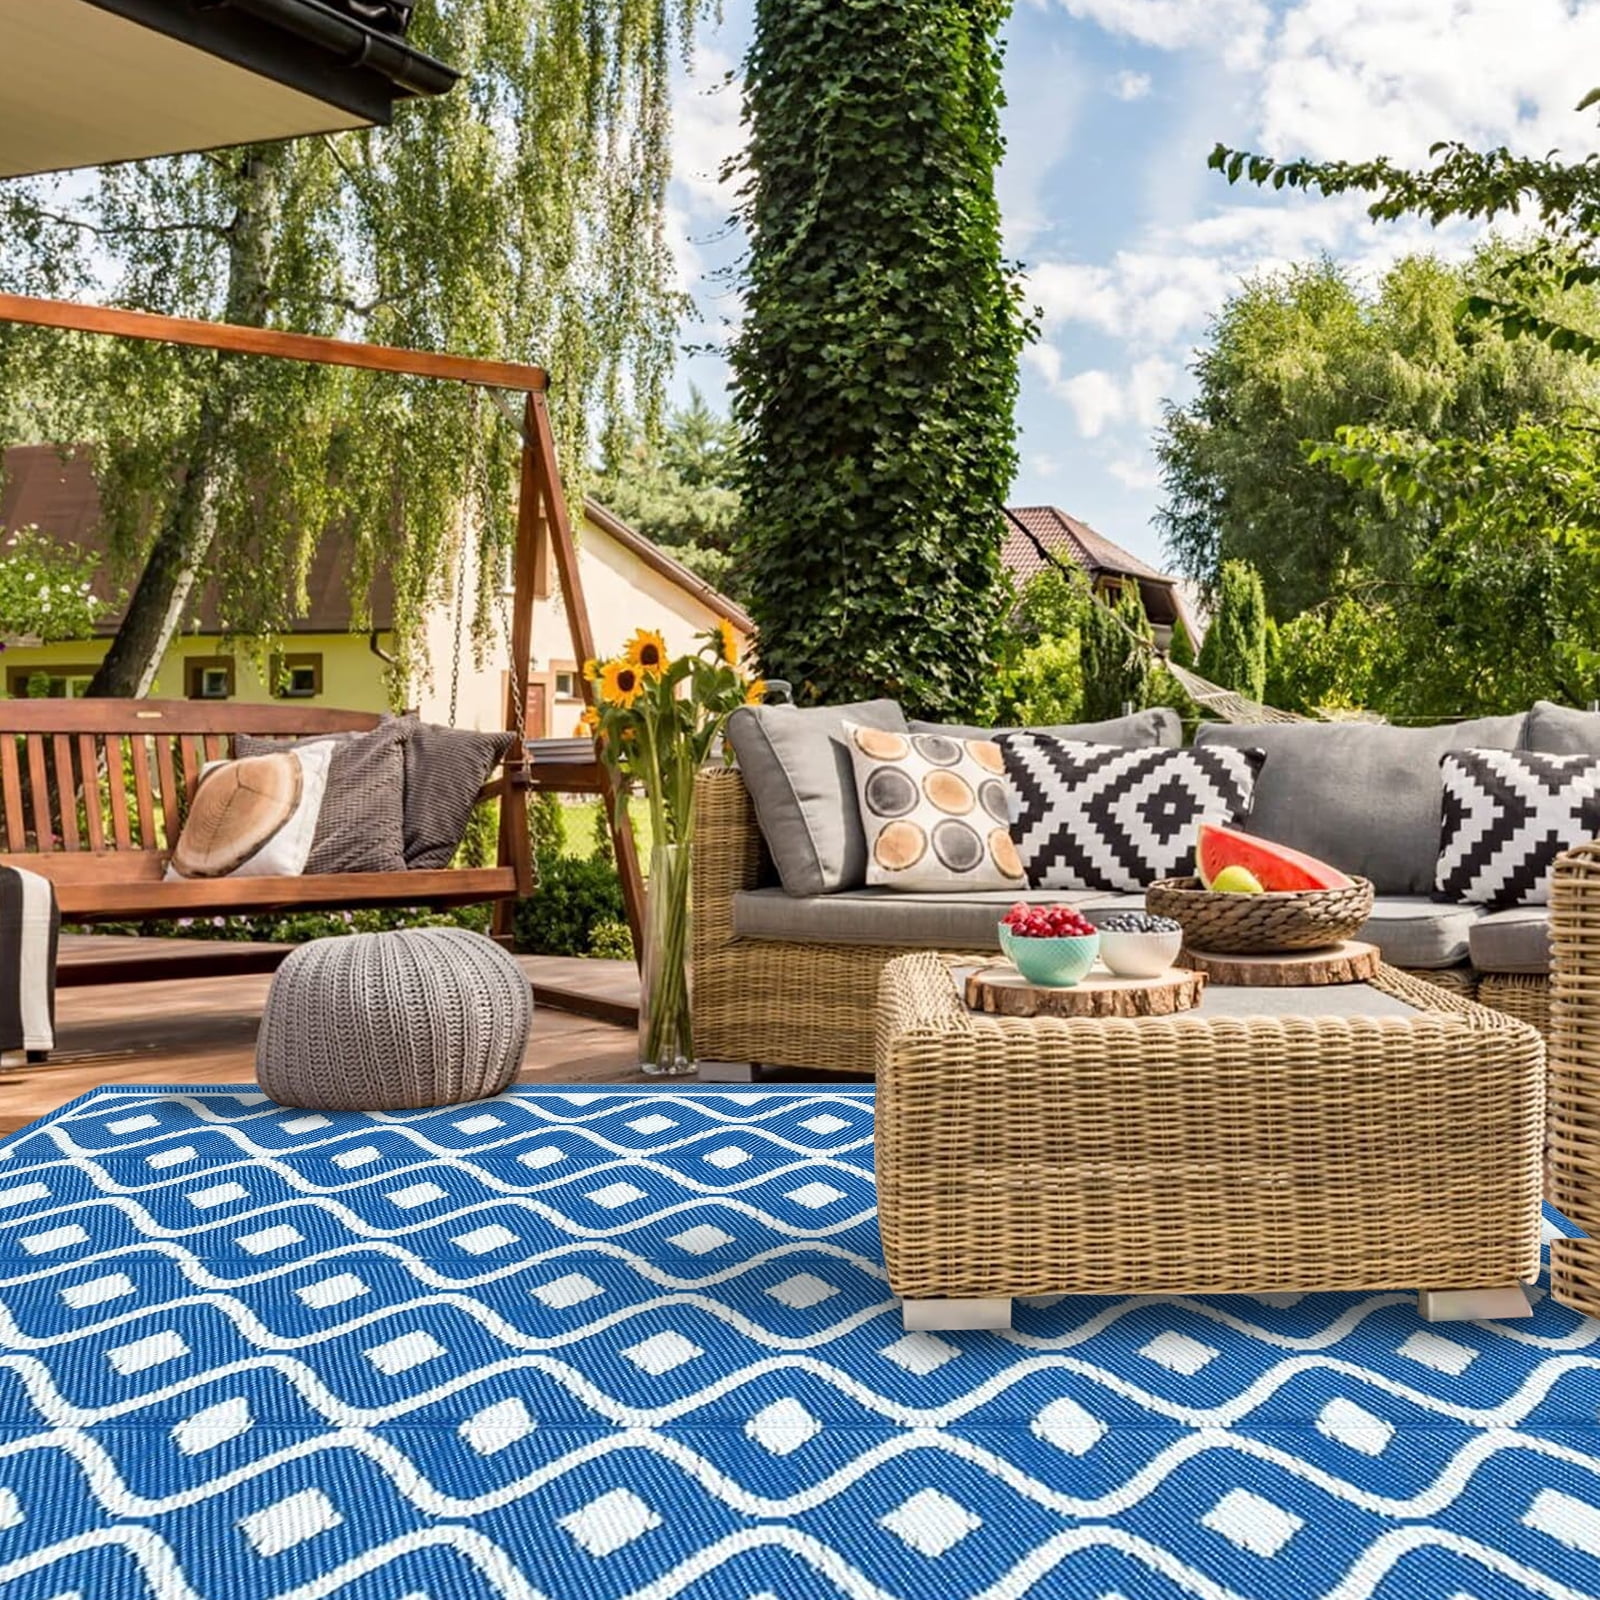 COOLMI Reversible Outdoor Rugs for Patio Clearance 4x6ft Waterproof Large Plastic Straw Area Rug Nonslip Portable Carpet Floor Mats for RV Camping Deck Picni